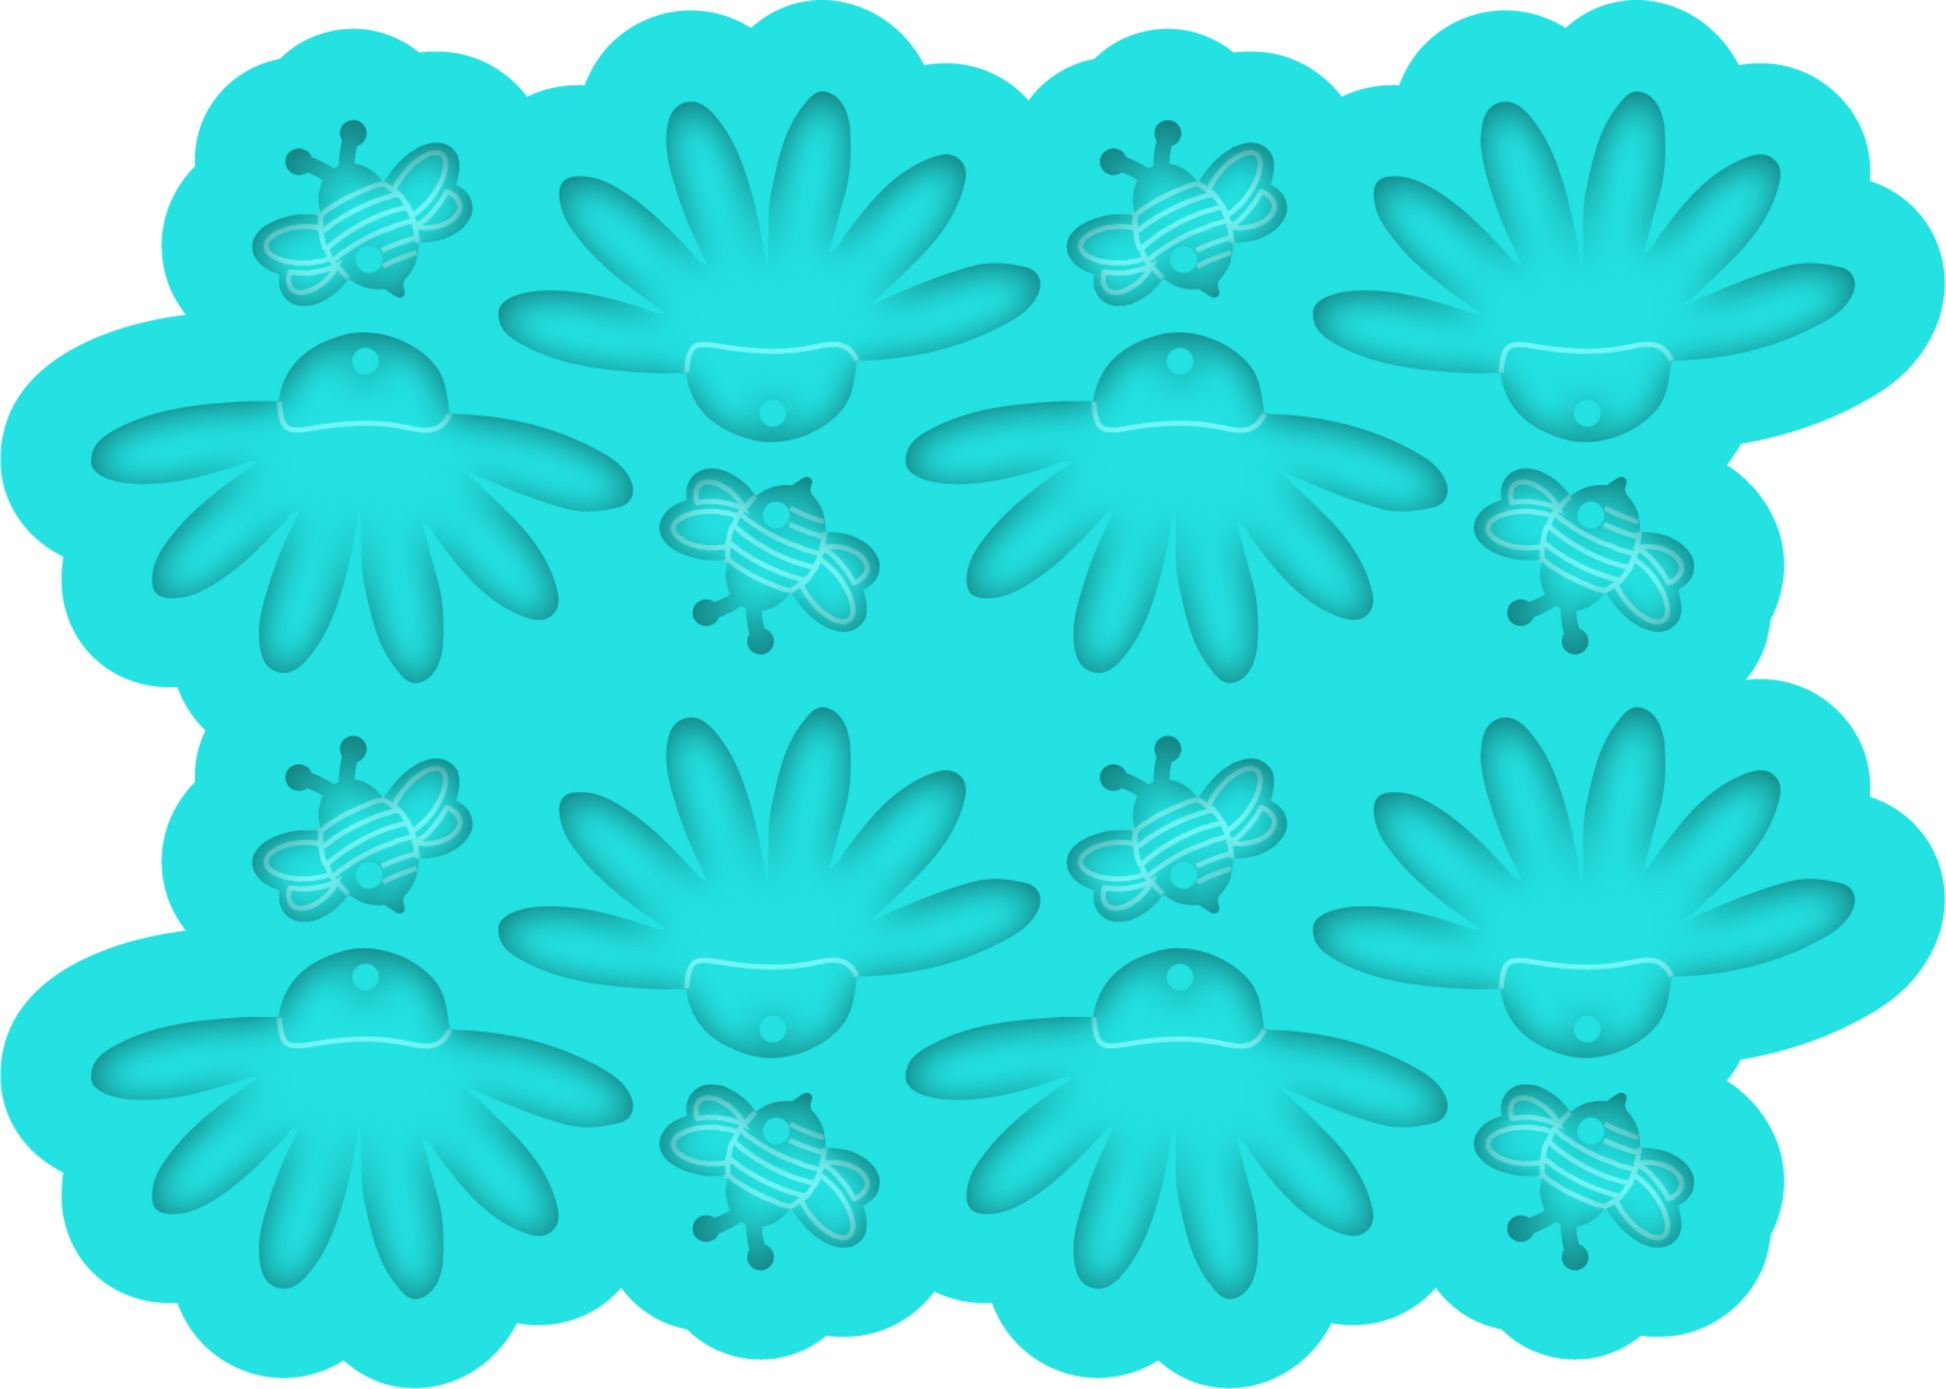 a blue paper with a flower design on it